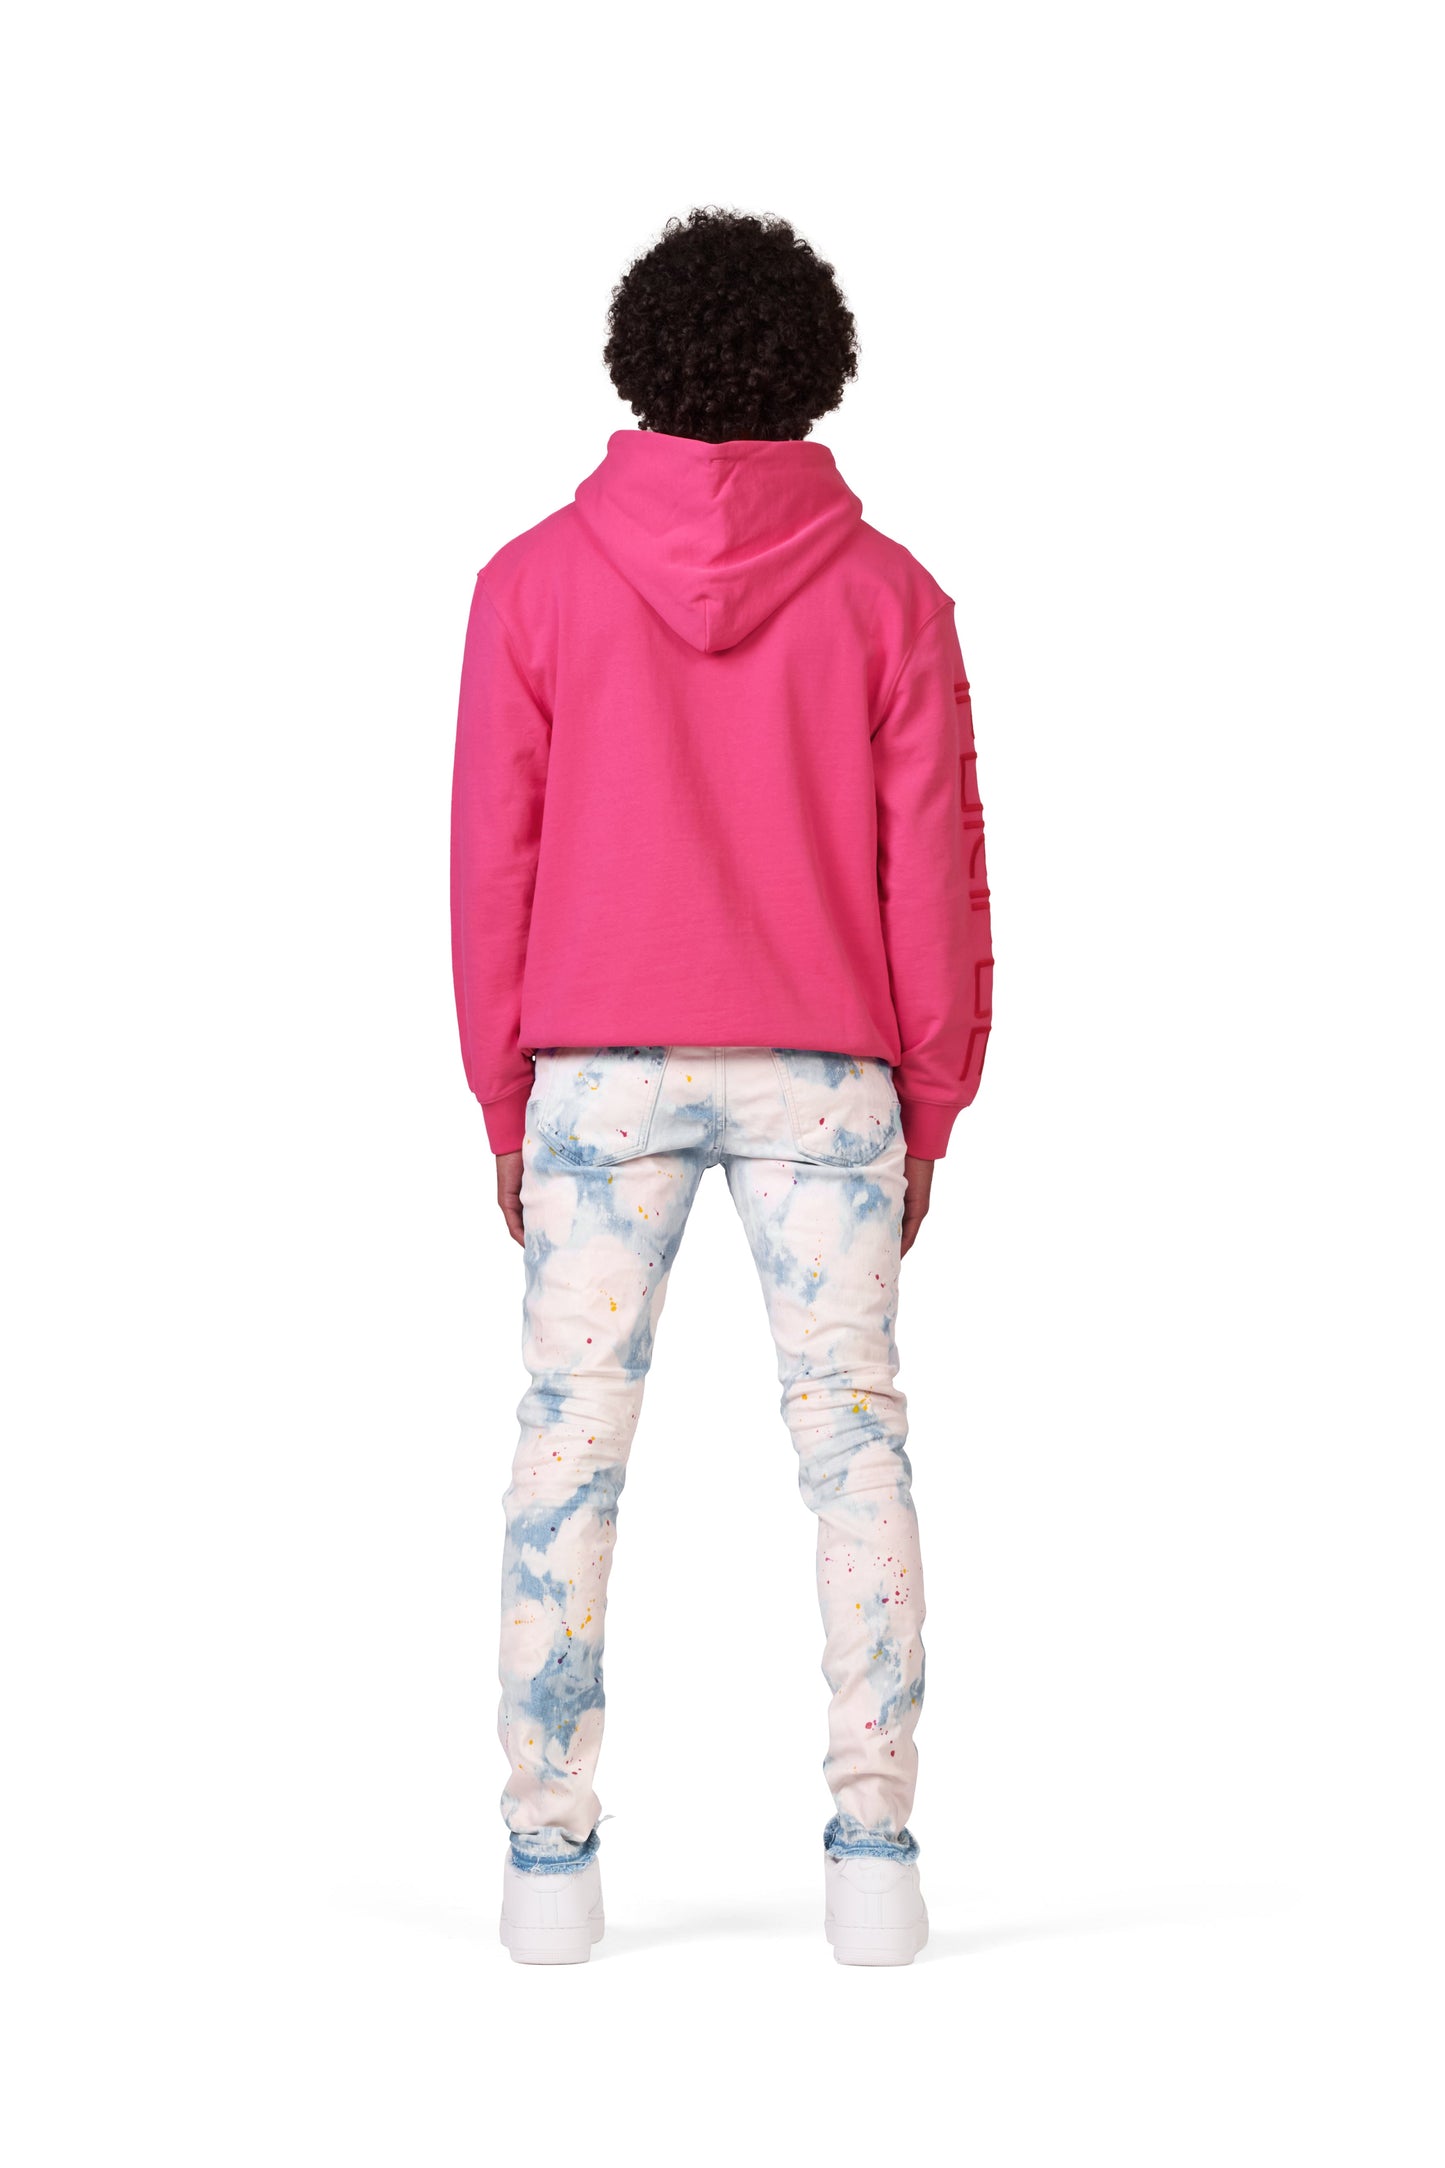 P001 LOW RISE SKINNY JEAN - Light Faded Indigo Bleached Out Splatter